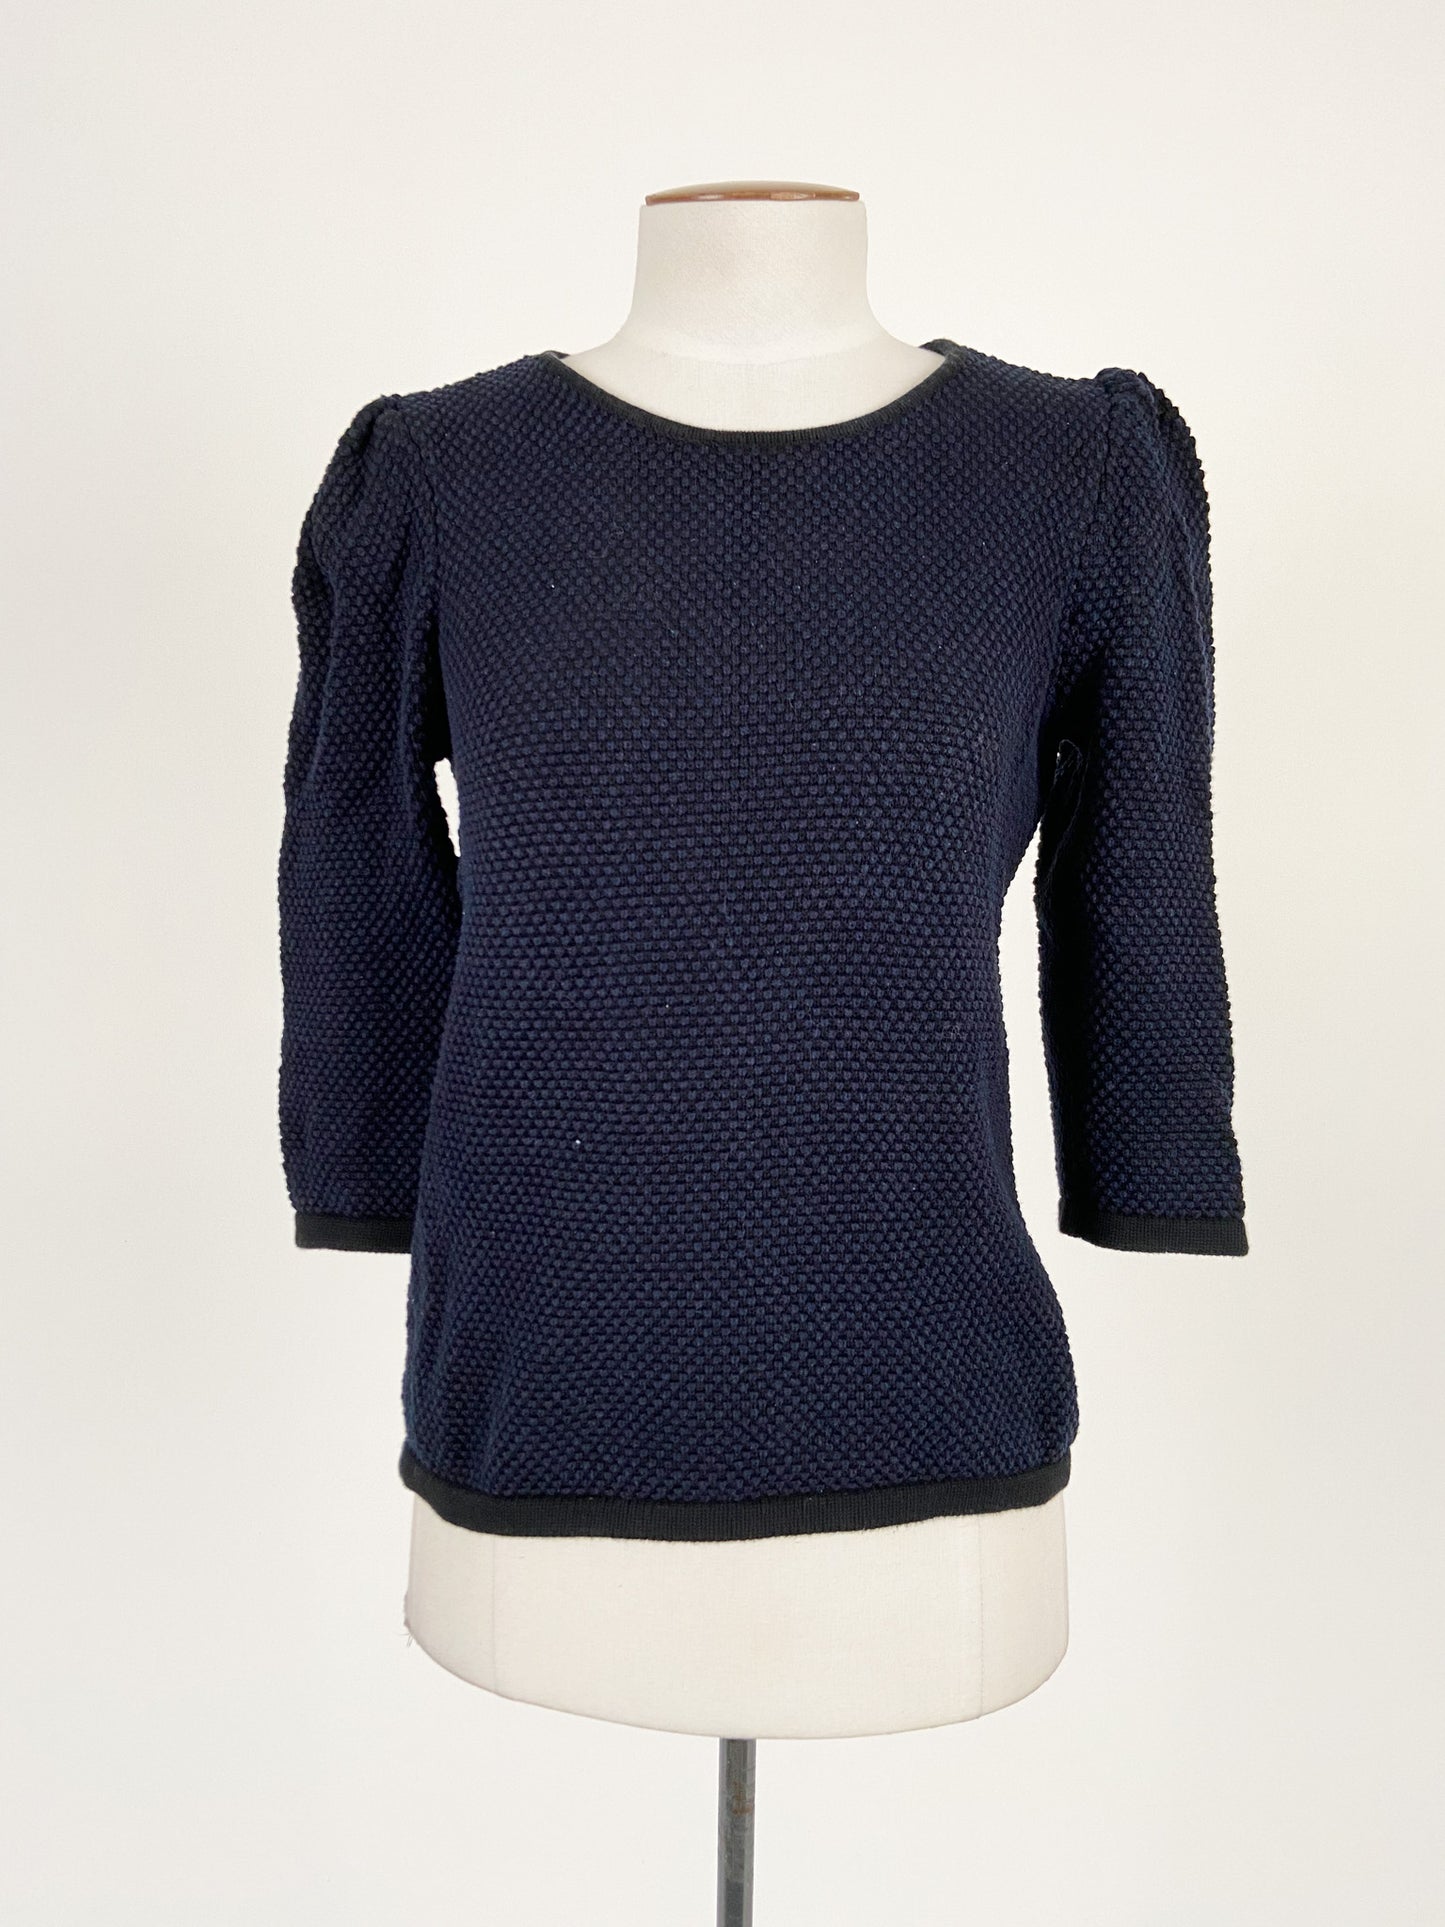 COS | Navy Casual Top | Size S